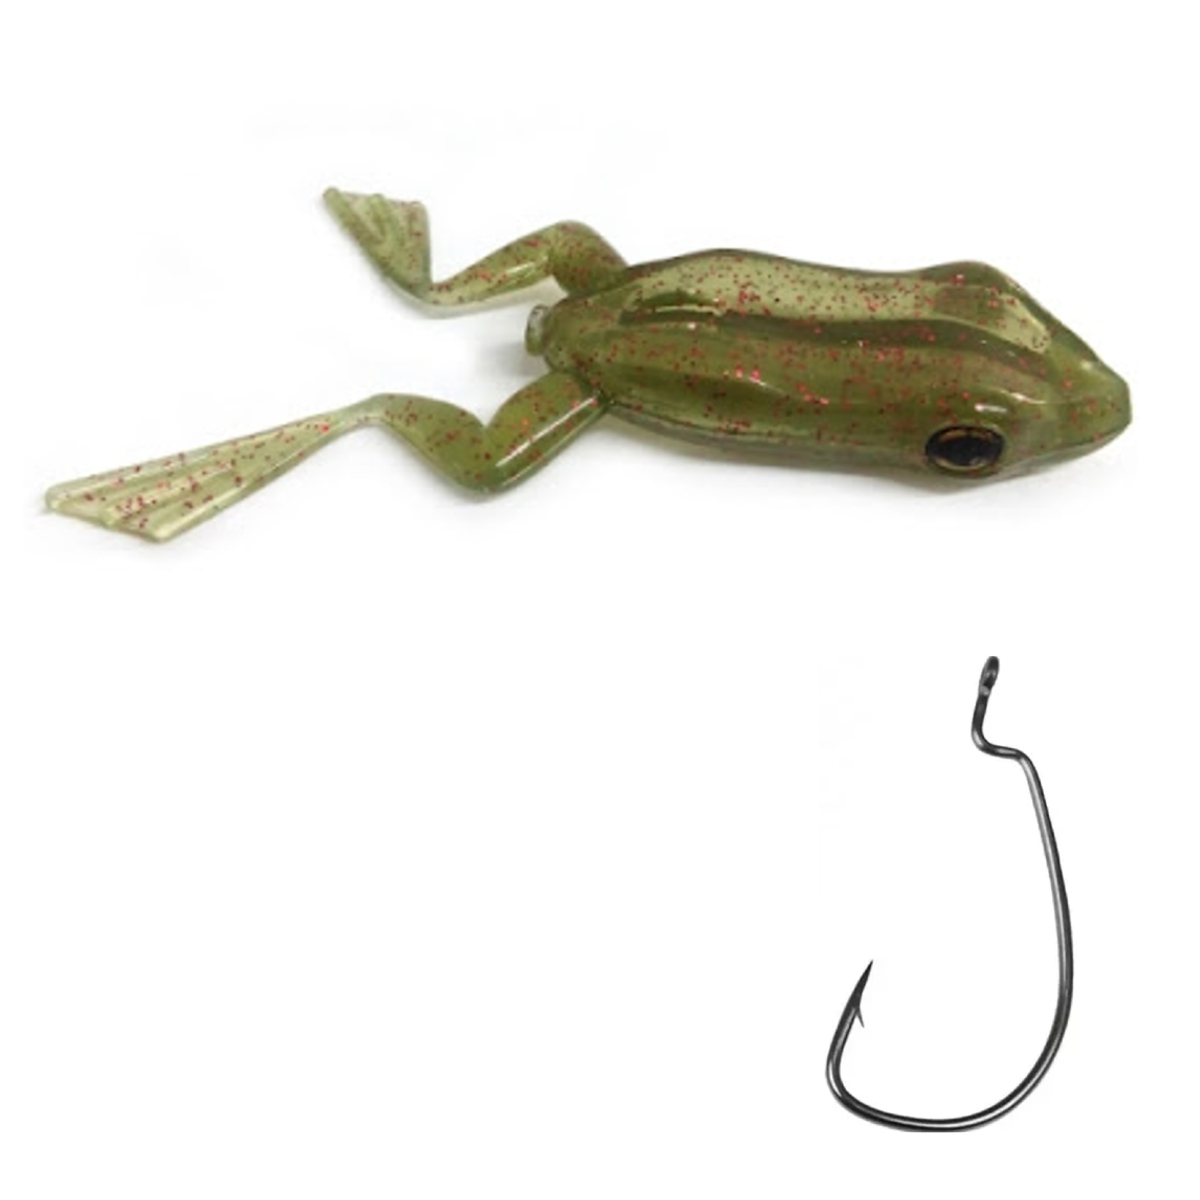 Isca Artificial Monster 3X X-frog Top Water + 1 Anzol Ewg